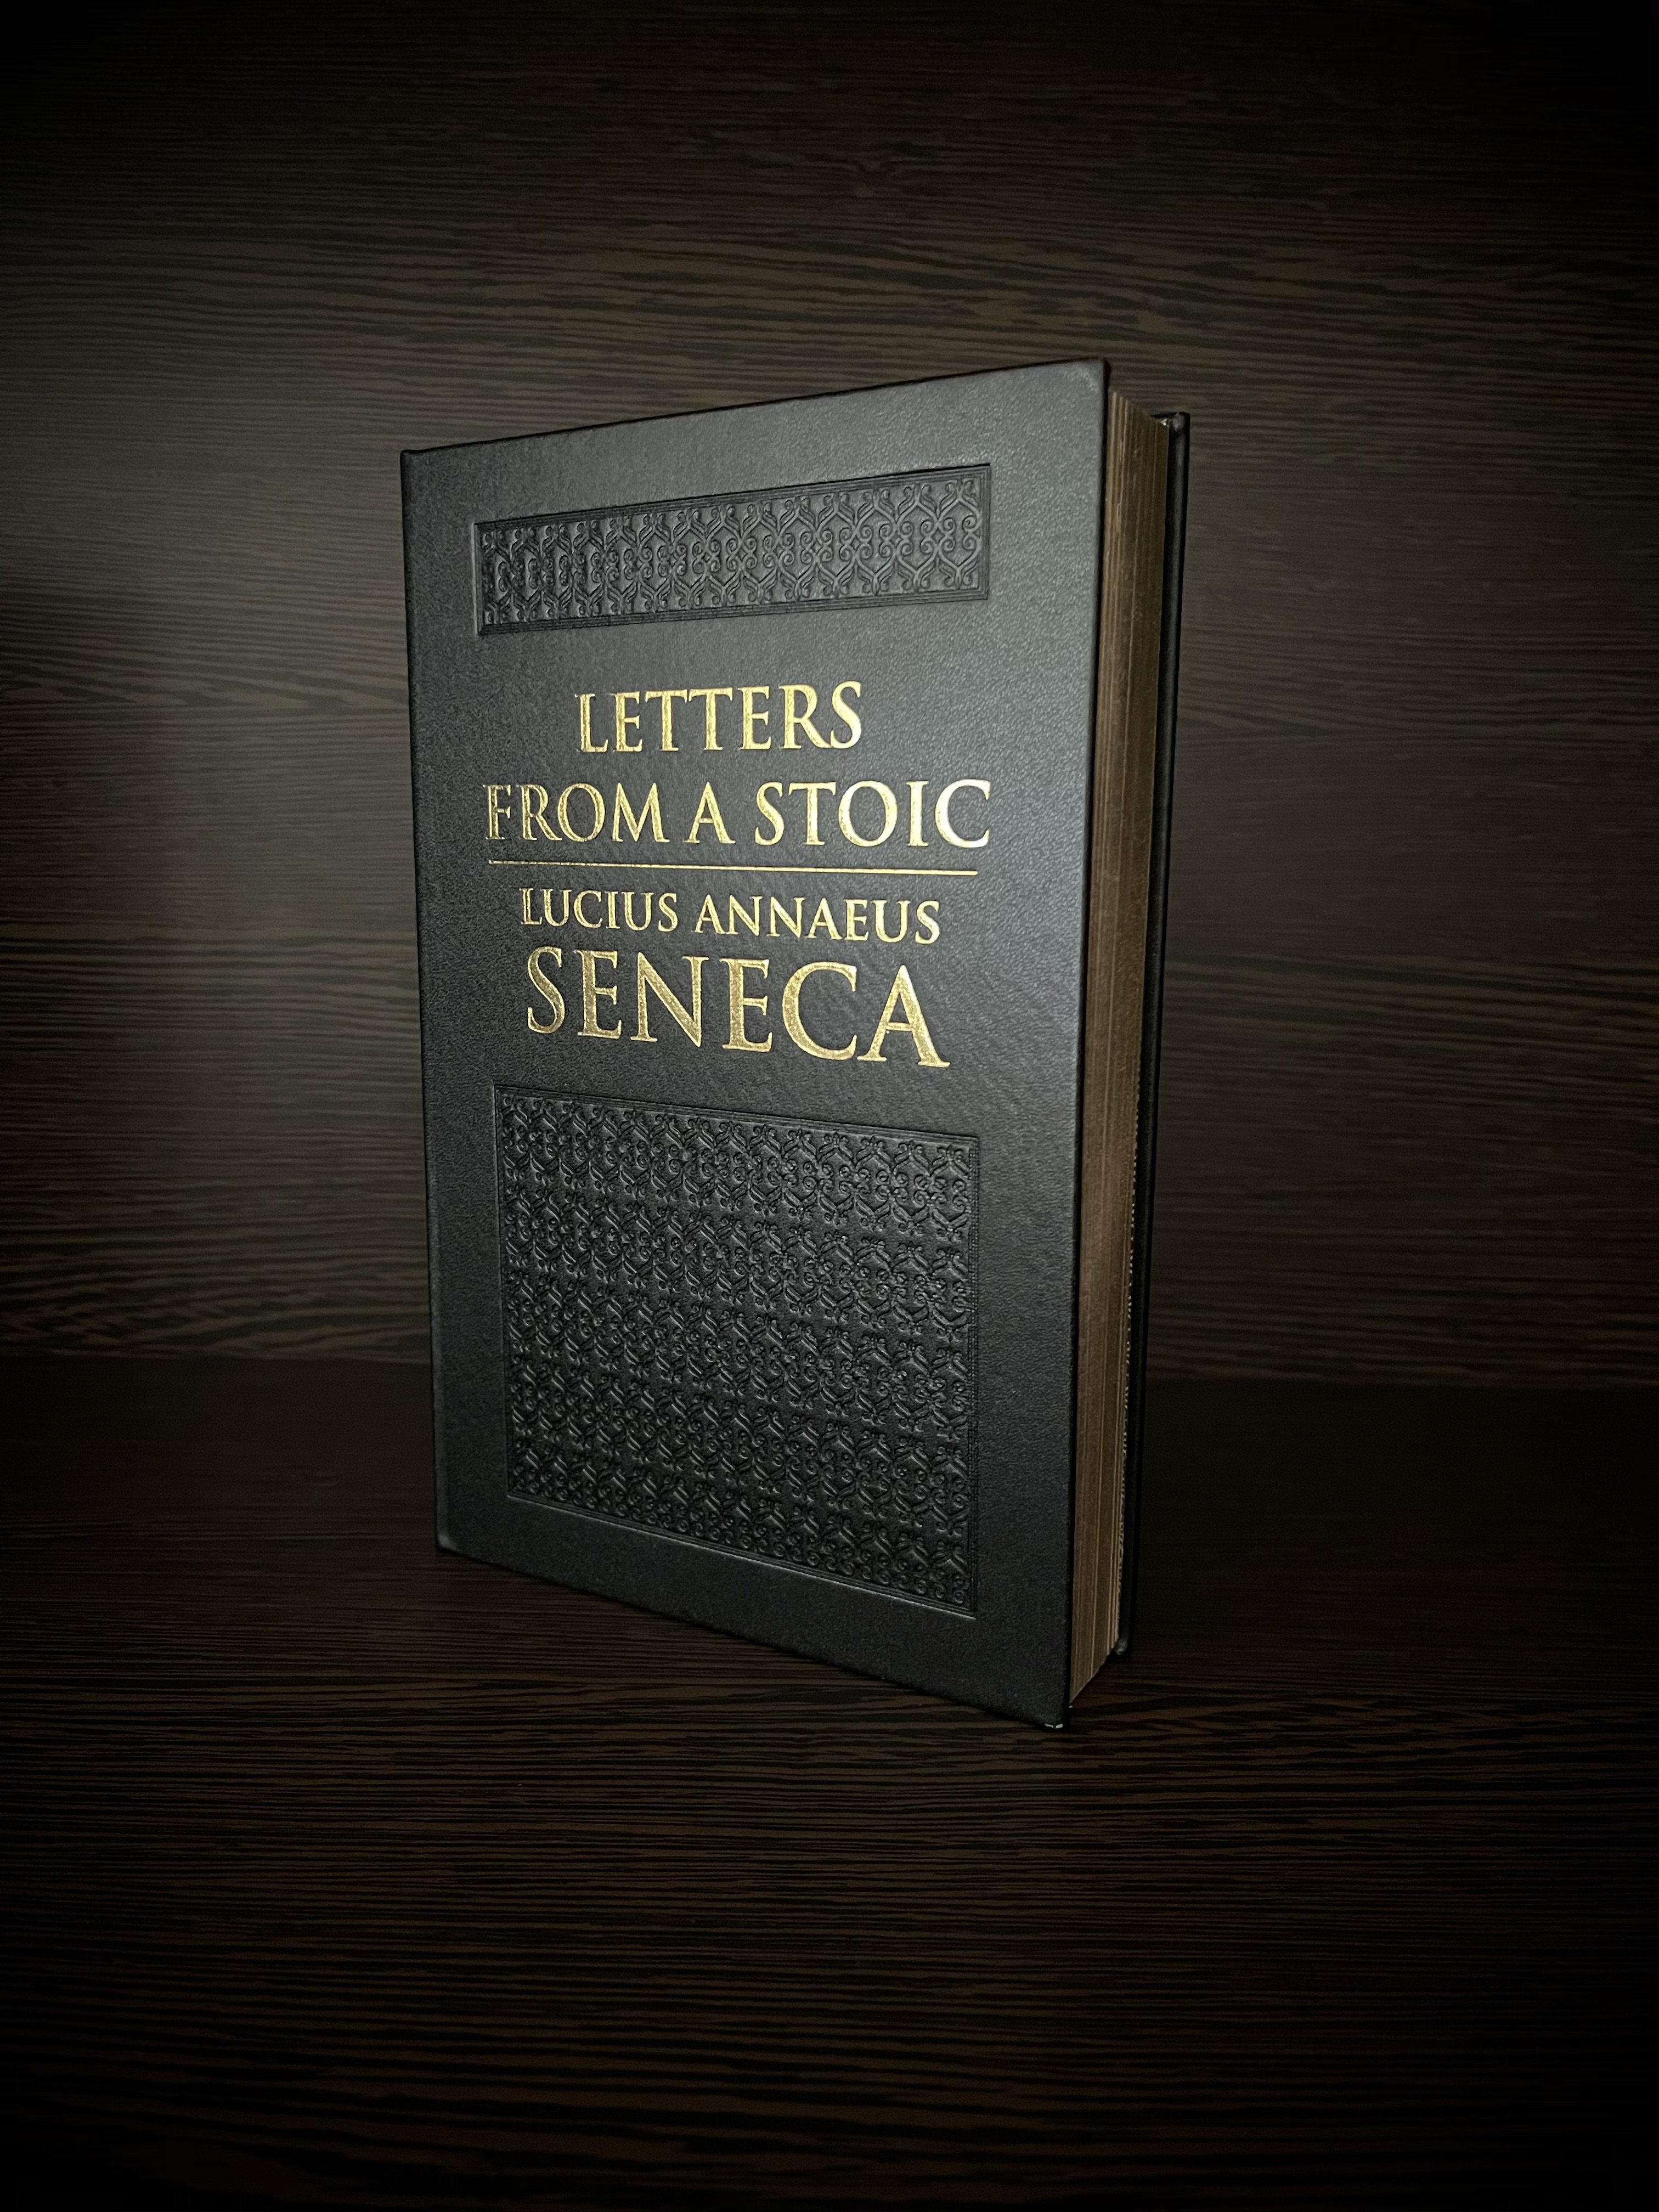 Letters from a Stoic - Seneca's correspondence offers a unique perspective on Stoic principles.